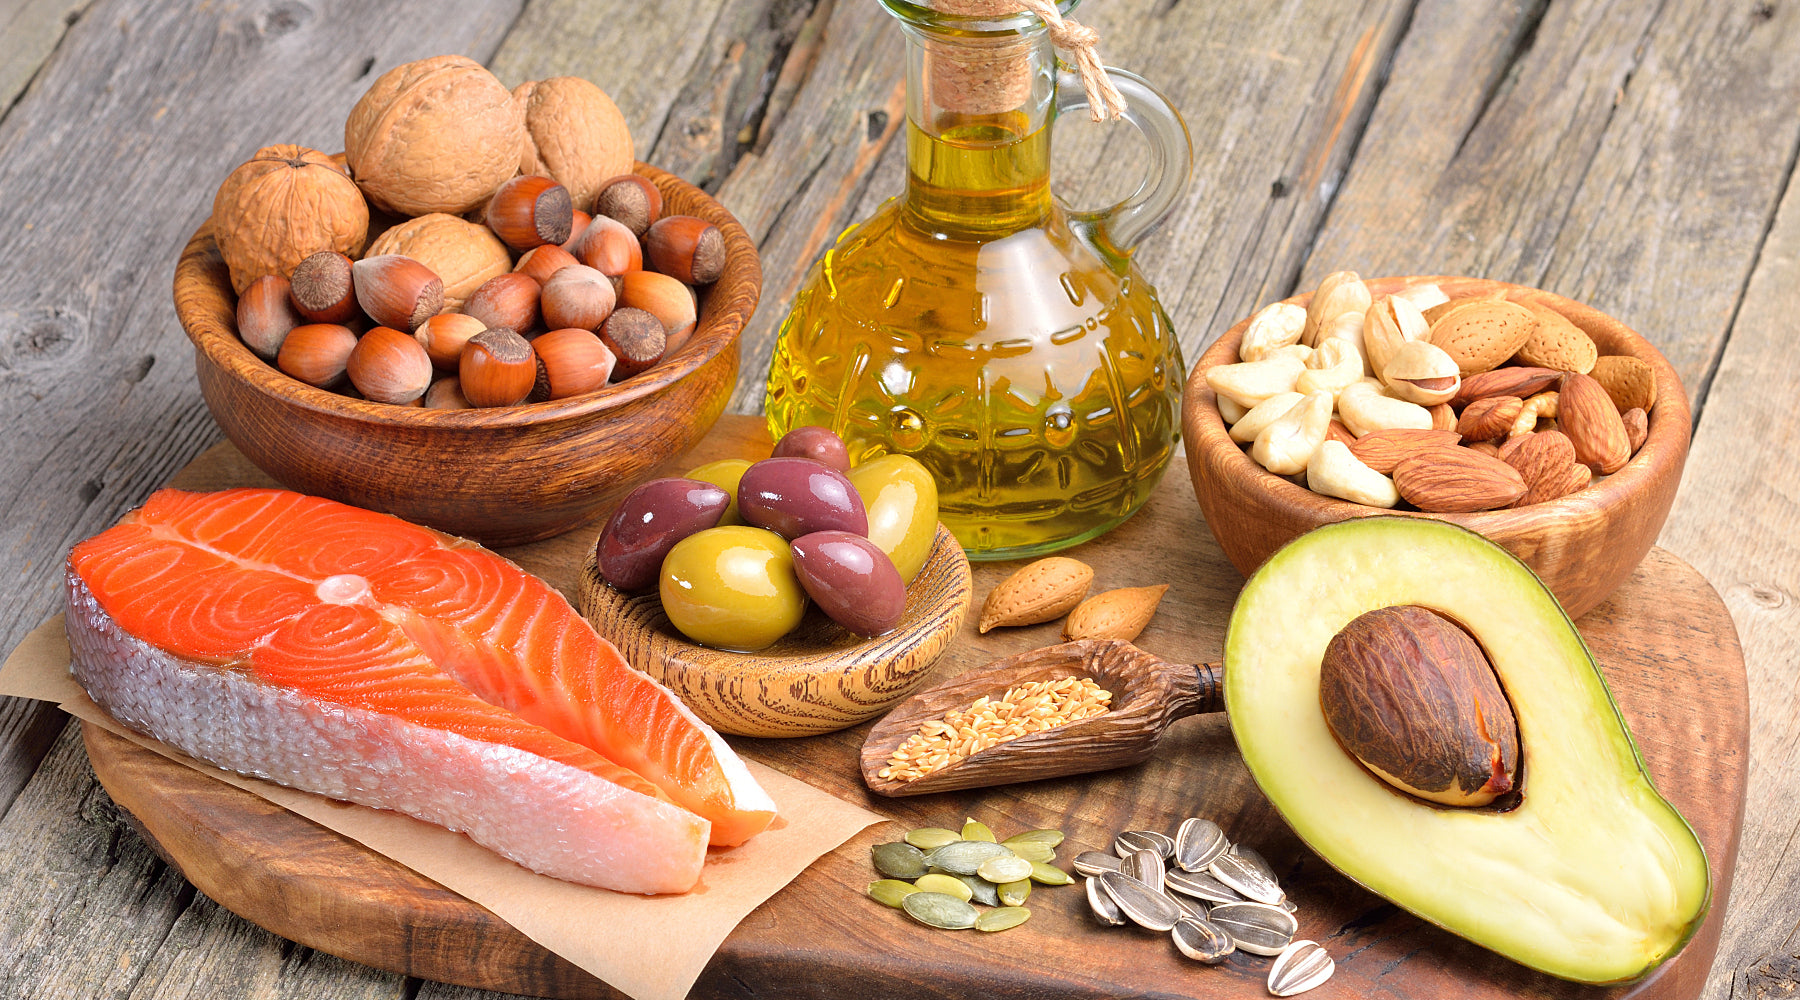 Sources of healthy fats - avocado, oily fish and nuts and seeds